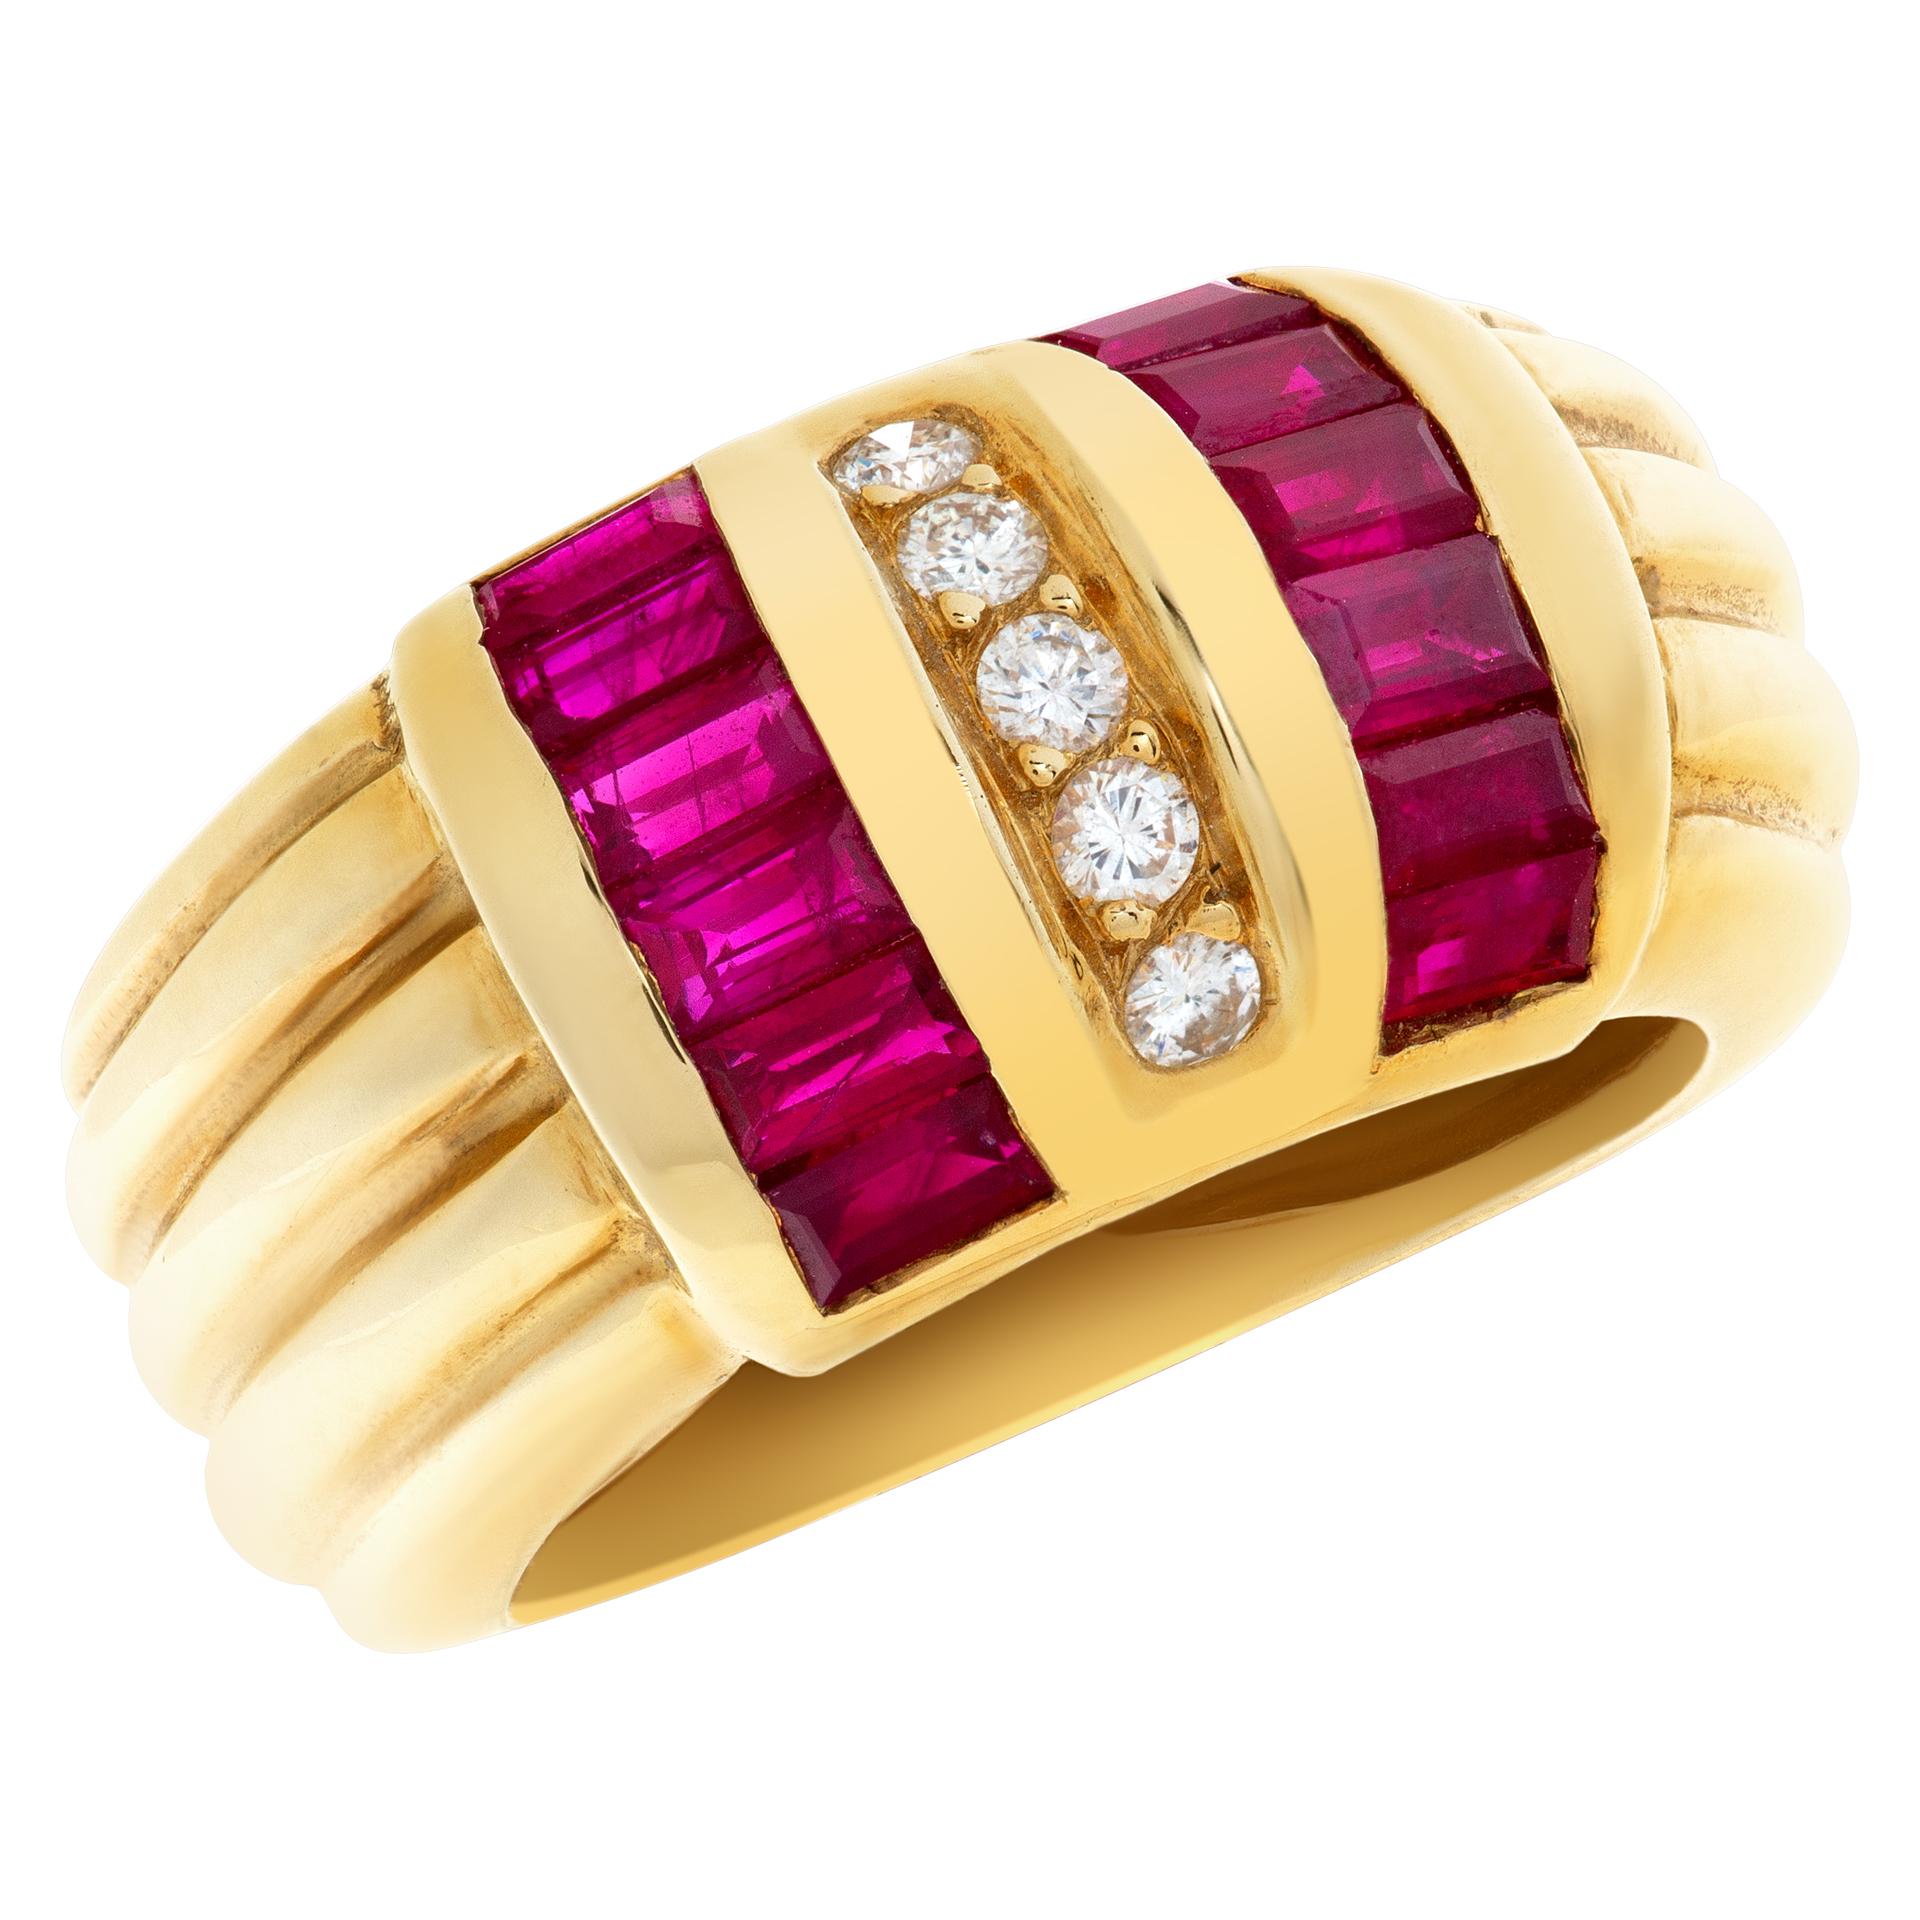 Ruby and Diamond Set in 18k Yellow Gold Ring In Excellent Condition For Sale In Surfside, FL